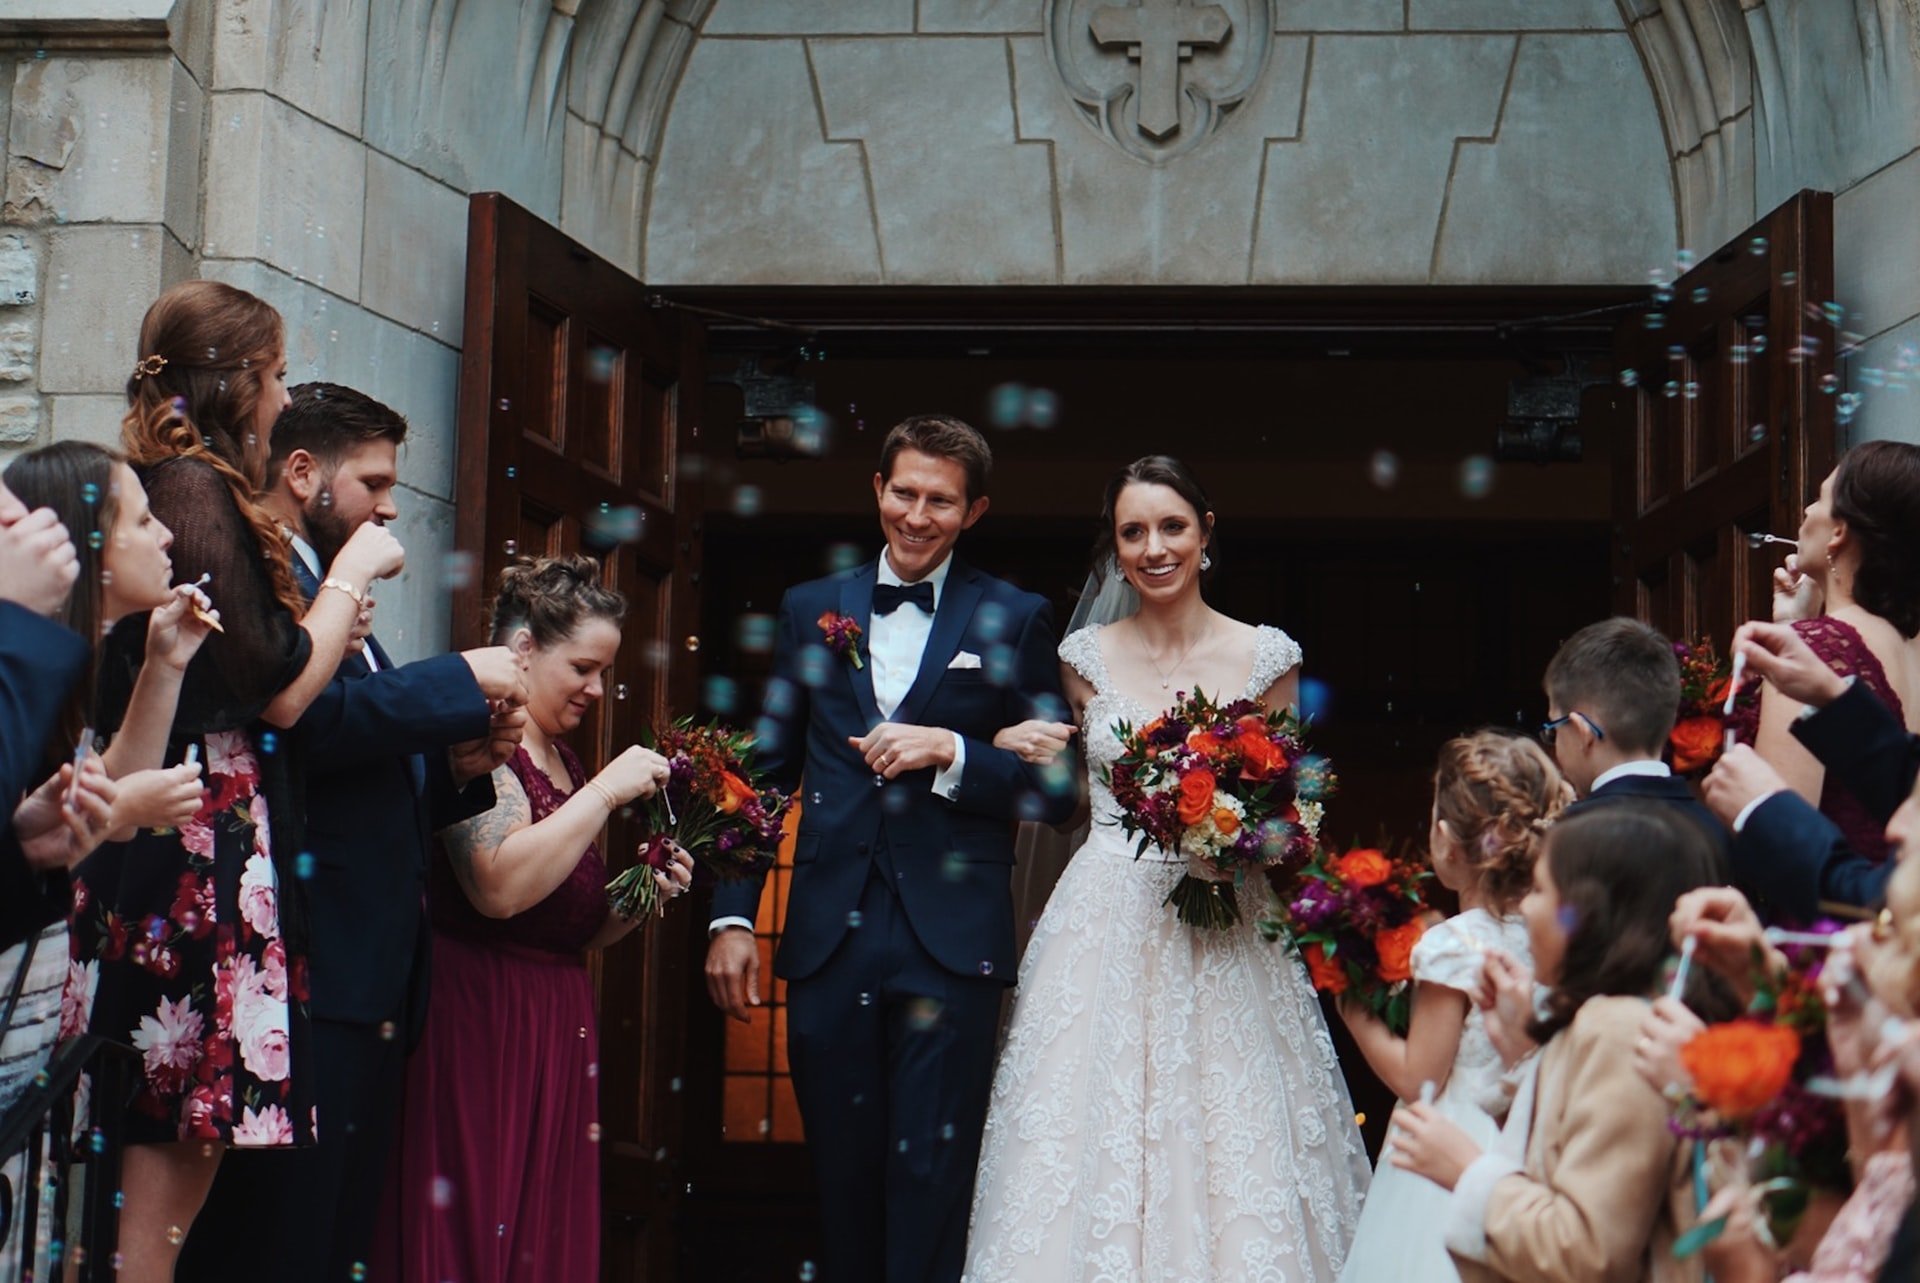 OP and his brother attended the wedding | Source: Unsplash